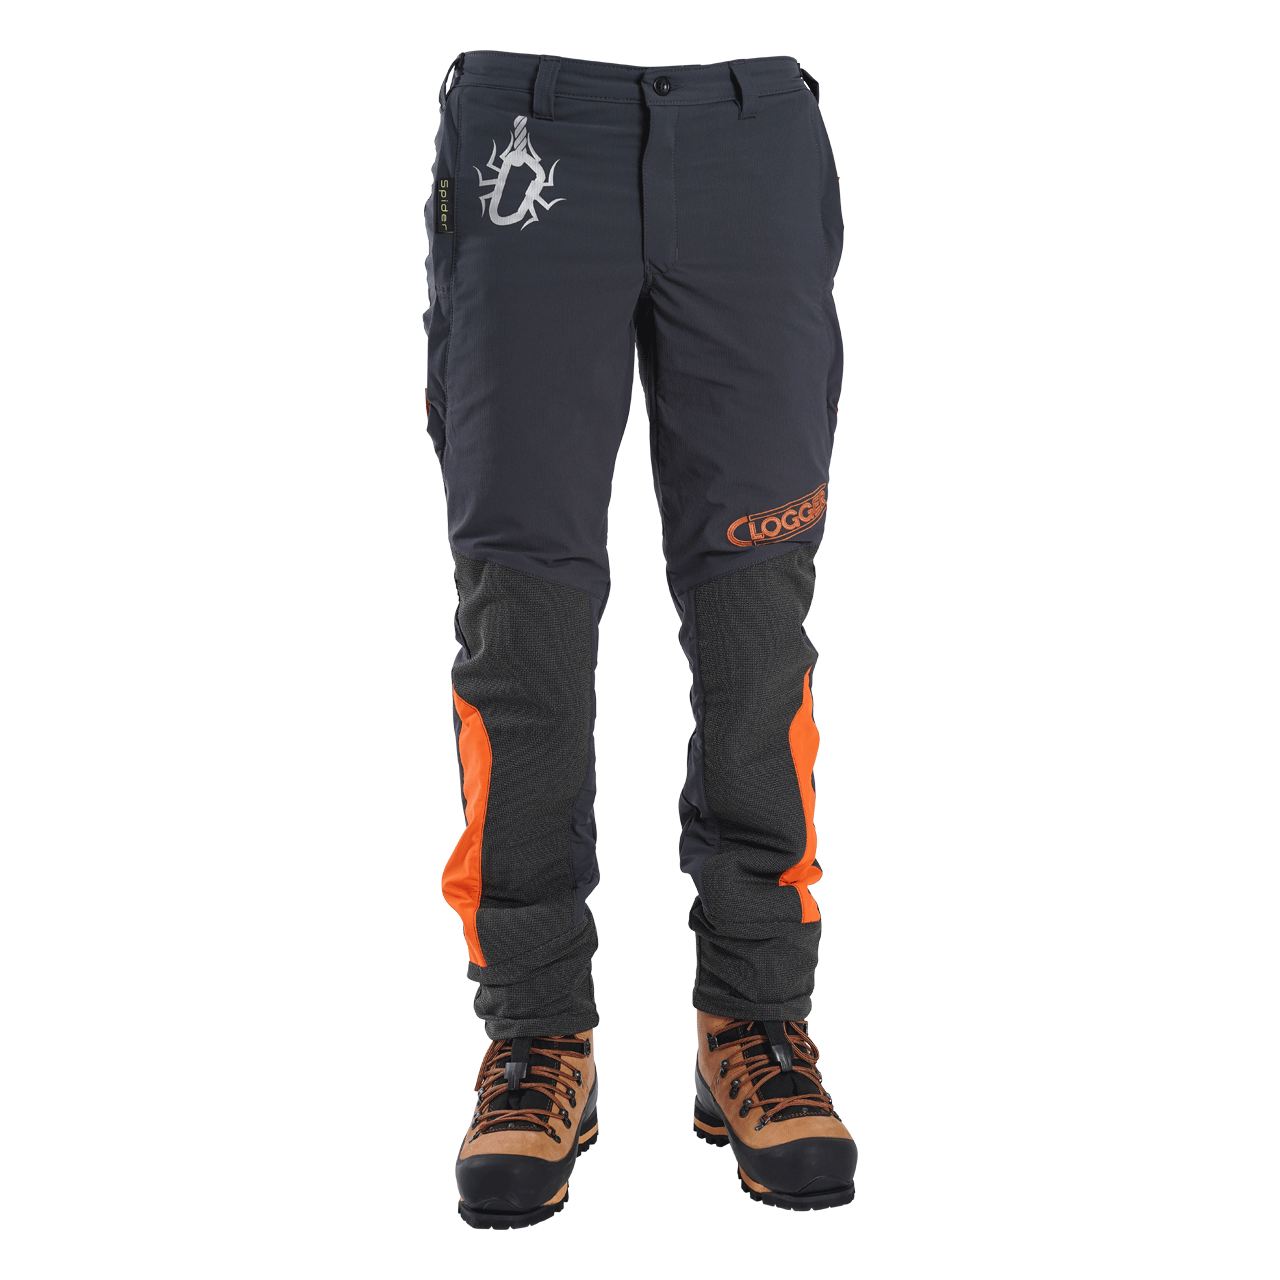 Clogger Spider Women's Climbing and Work Pants (Not Chainsaw Protective)